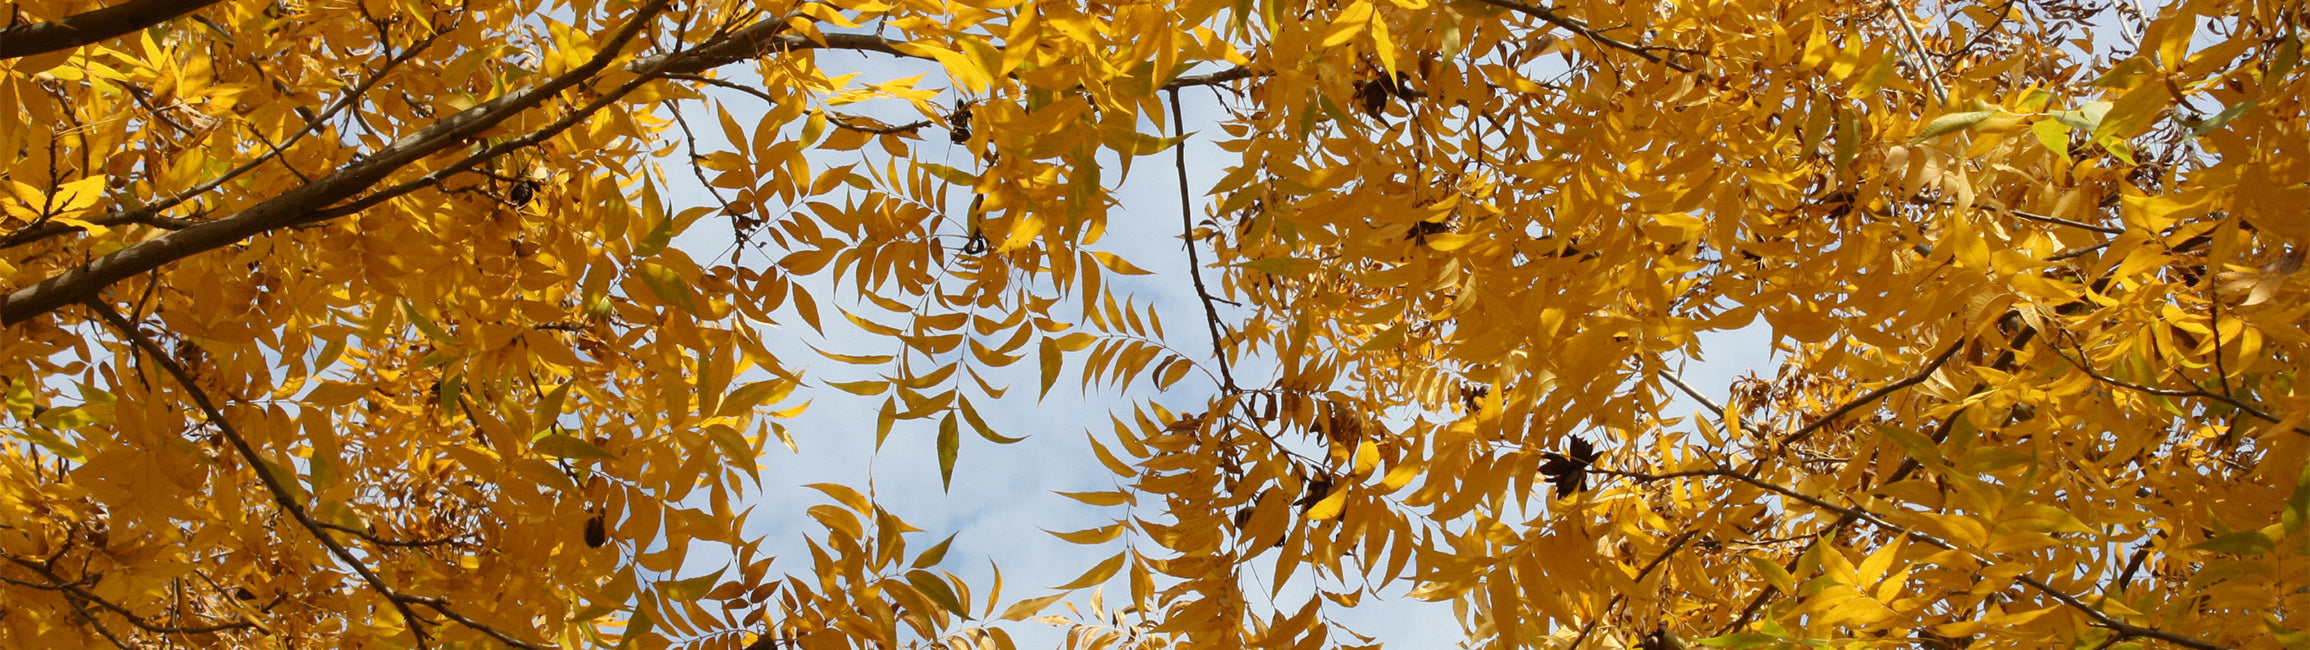 Yellow and golden autumn leaves on a tree